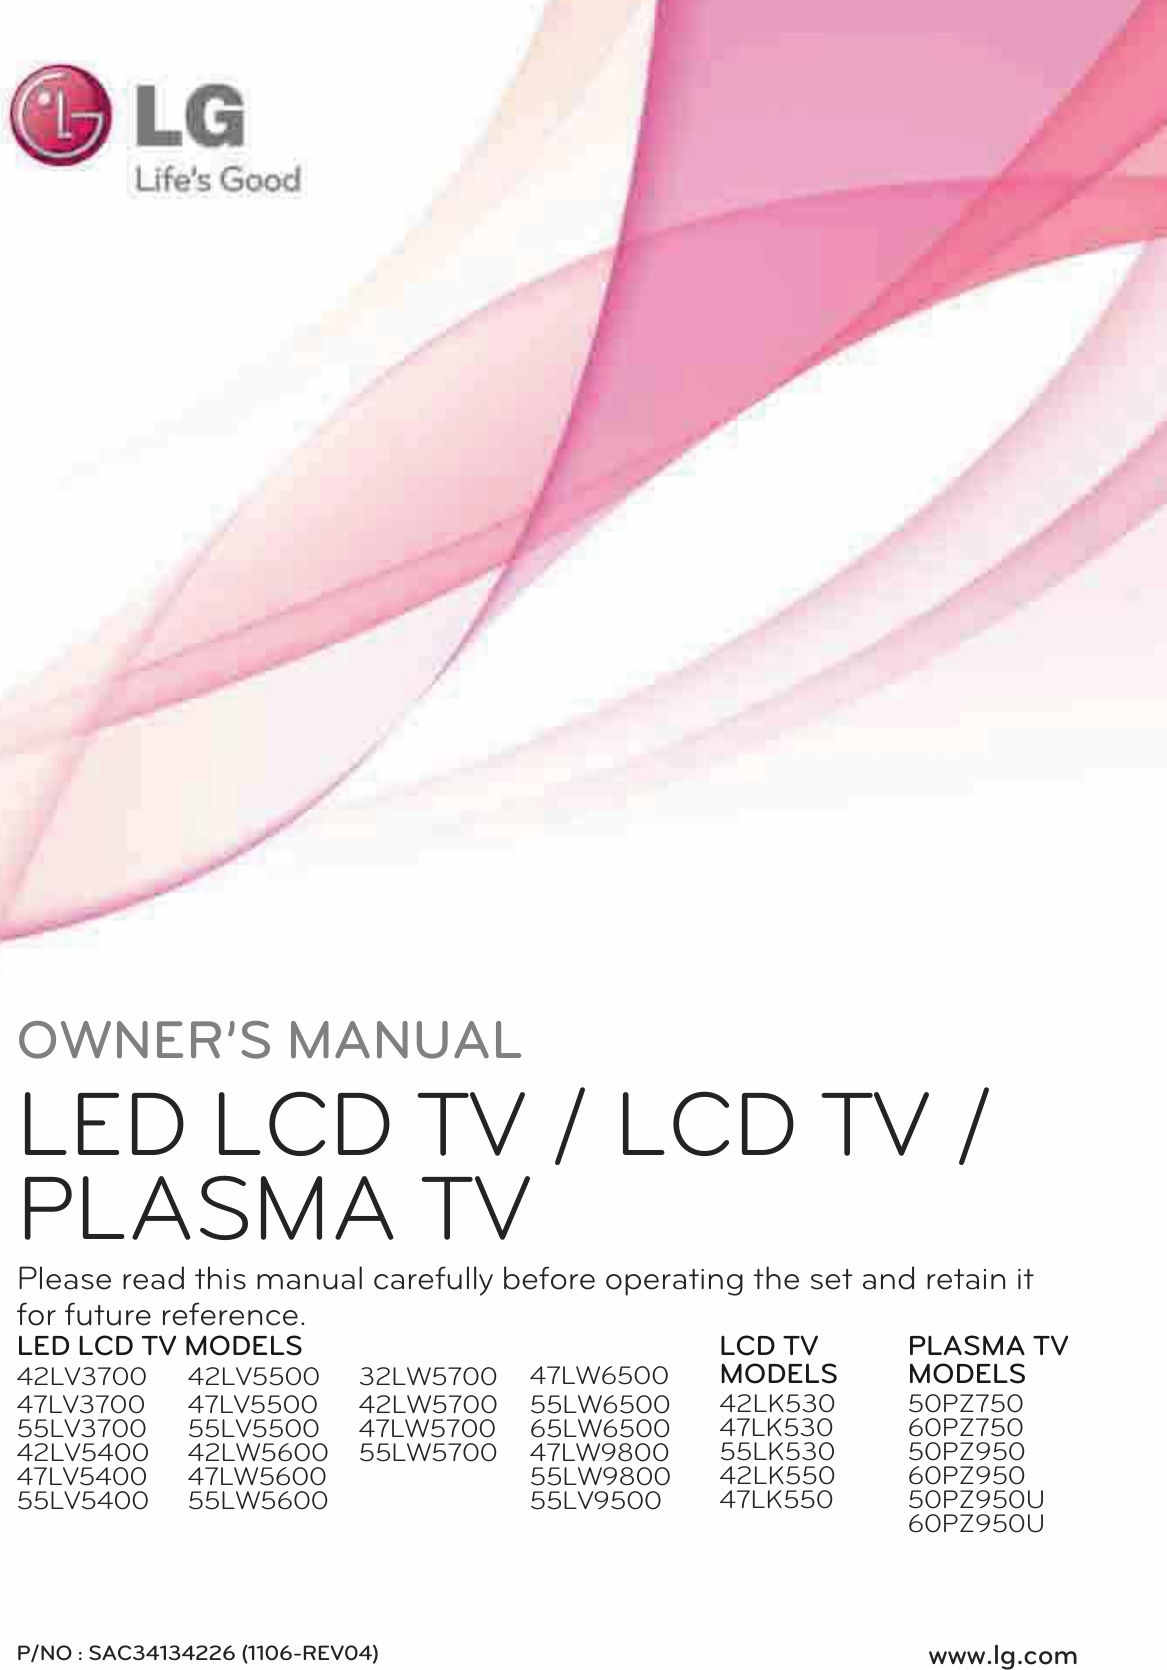 OWNER’S MANUALLED LCD TV / LCD TV /PLASMA TVPlease read this manual carefully before operating the set and retain itfor future reference.LED LCD TV MODELS LCD TVMODELS42LK53047LK53055LK53042LK55047LK550PLASMA TVMODELS50PZ75060PZ75050PZ95060PZ95050PZ950U60PZ950U42LV370047LV370055LV370042LV540047LV540055LV540042LV550047LV550055LV550042LW560047LW560055LW560032LW570042LW570047LW570055LW570047LW650055LW650065LW650047LW980055LW980055LV9500P/NO : SAC34134226 (1106-REV04) www.lg.com